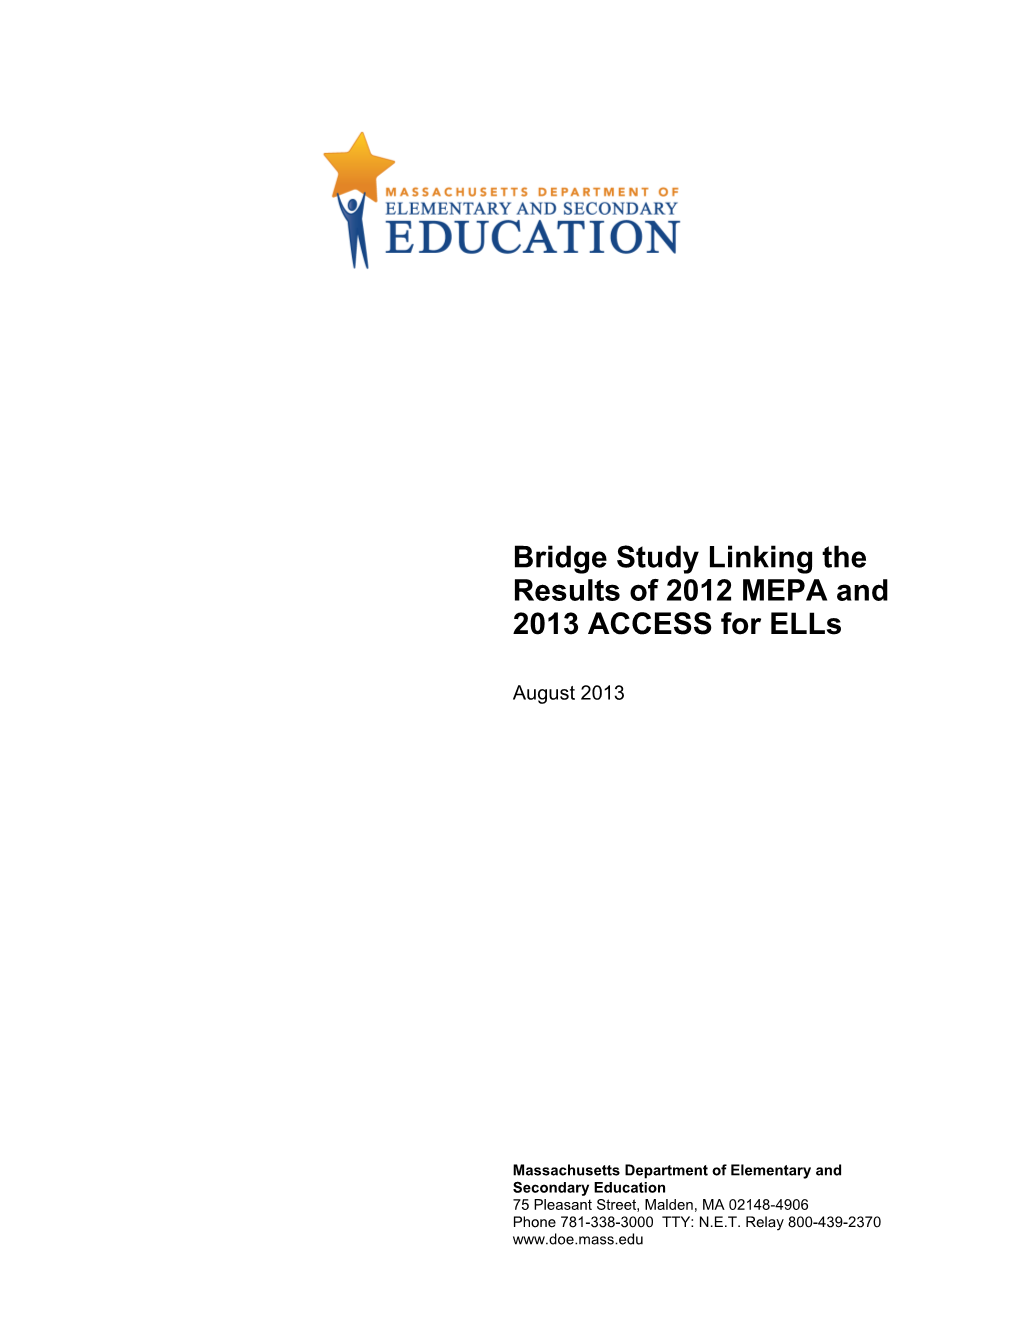 Bridge Study Linking the Results of 2012 MEPA and 2013 ACCESS for Ells